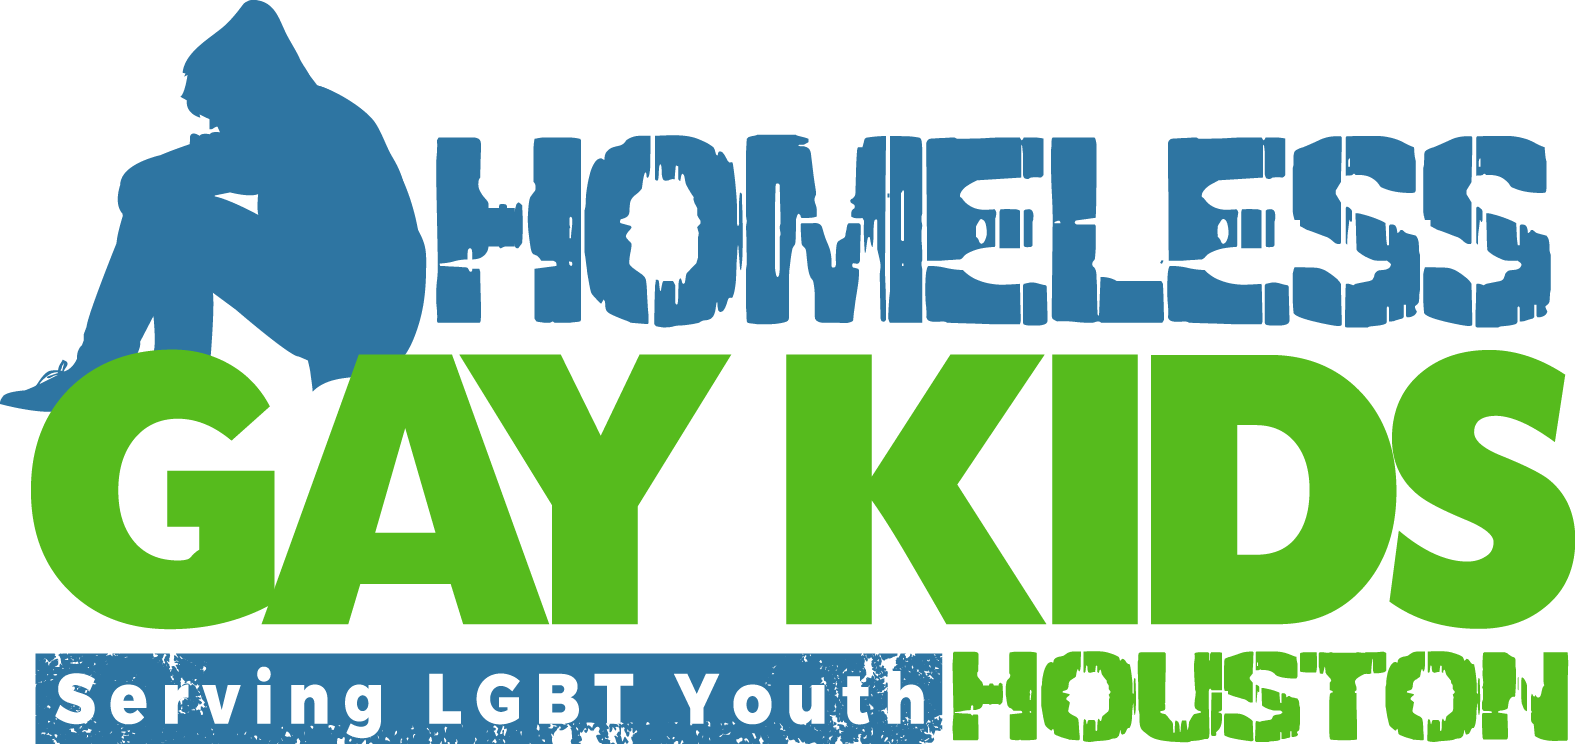 Homeless Gay Kids-Houston spent more than a year raising close to $200,000 to create Tony's Place, a drop-in center for homeless LGBT youth in Montrose. Organizers expect it will take $400,000 in yearly donations to keep the center open.